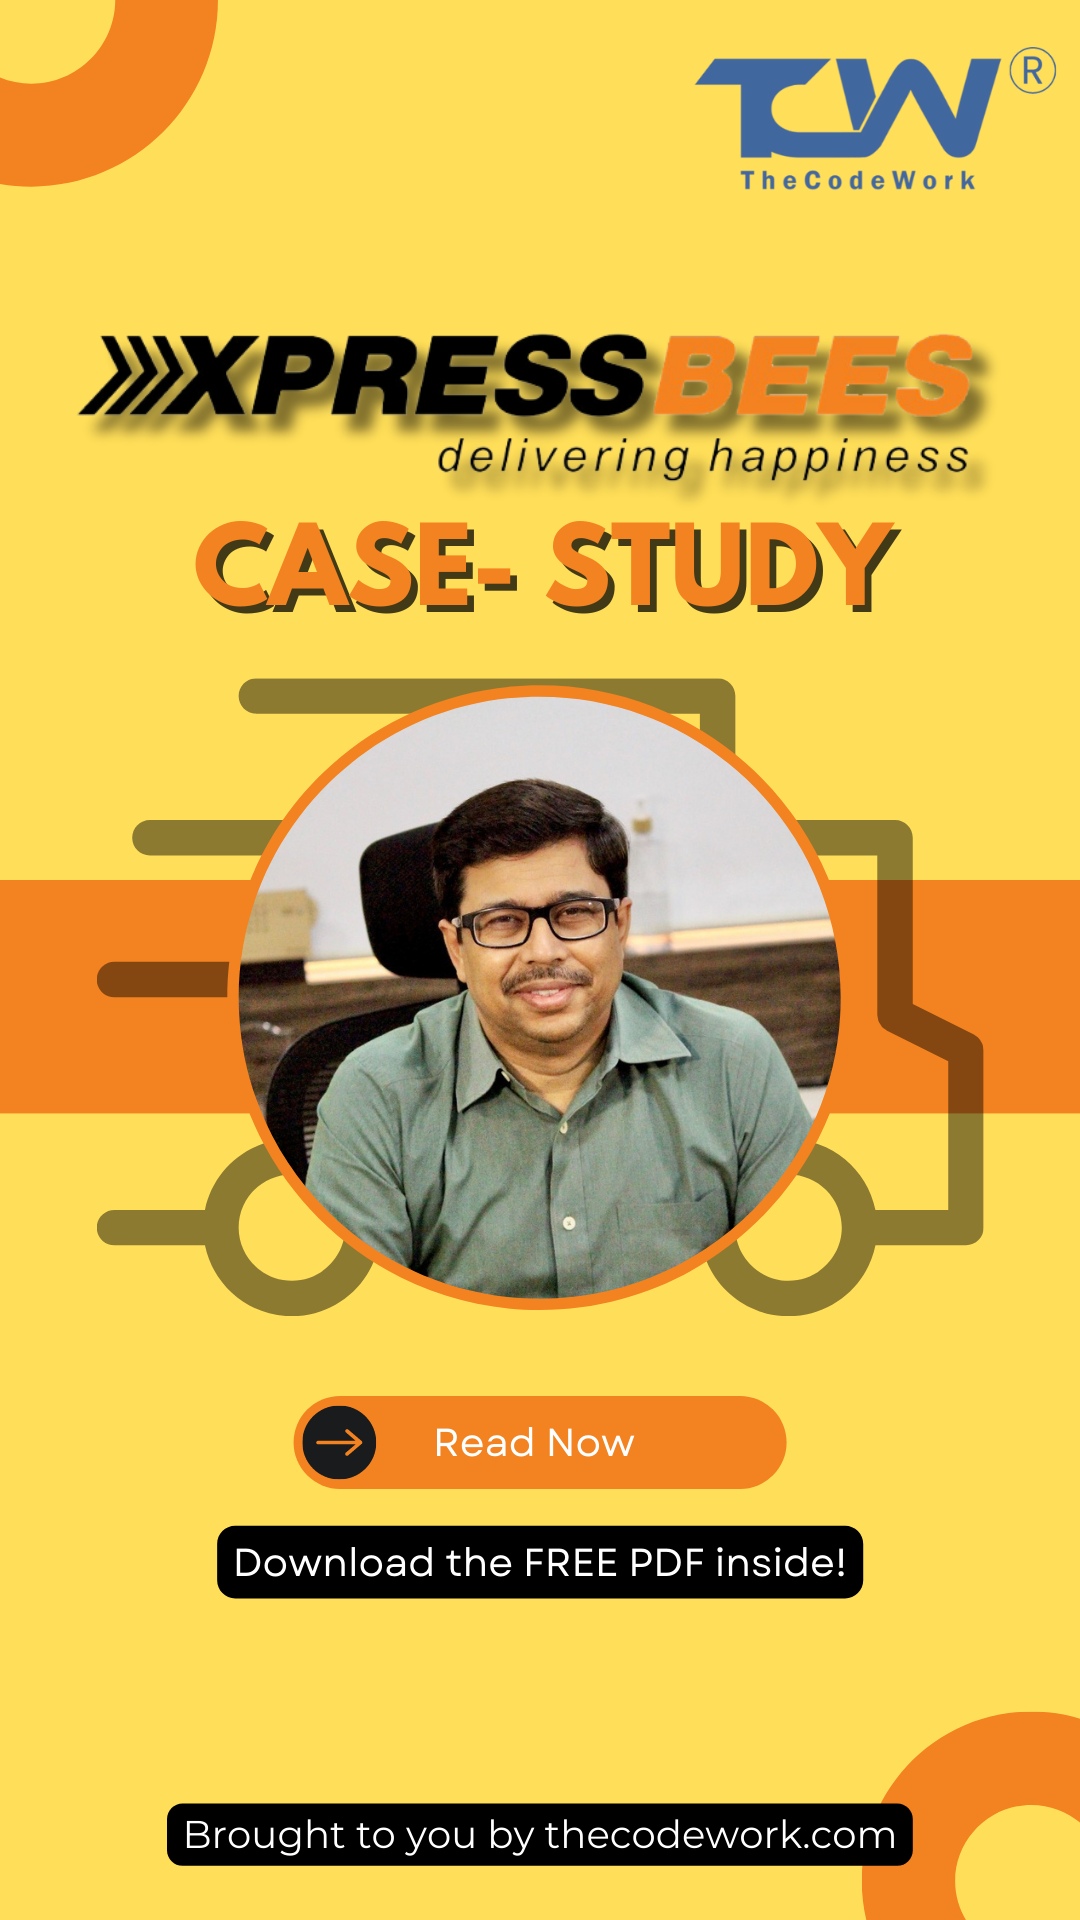 From Startup to Logistics Powerhouse: Xpressbees Case Study 